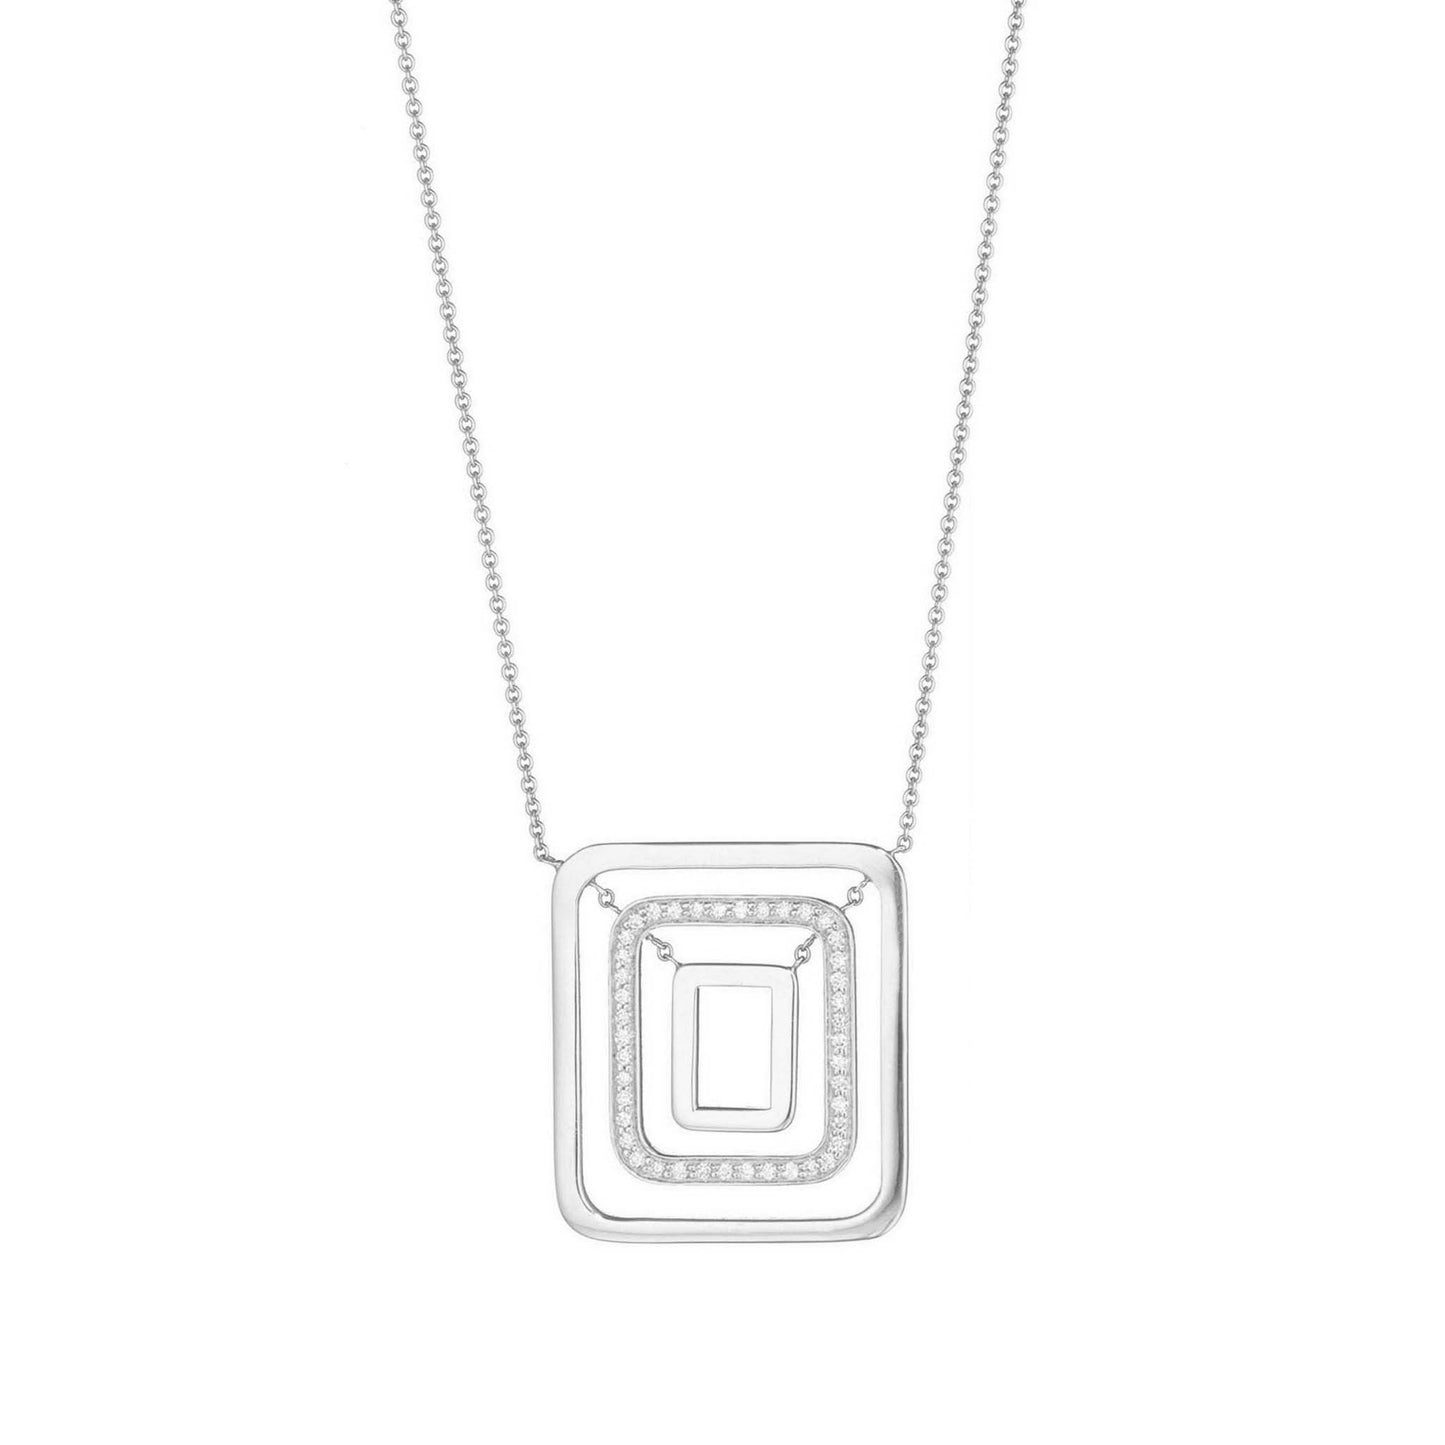 Piece Square Swing Necklace_18k White Gold